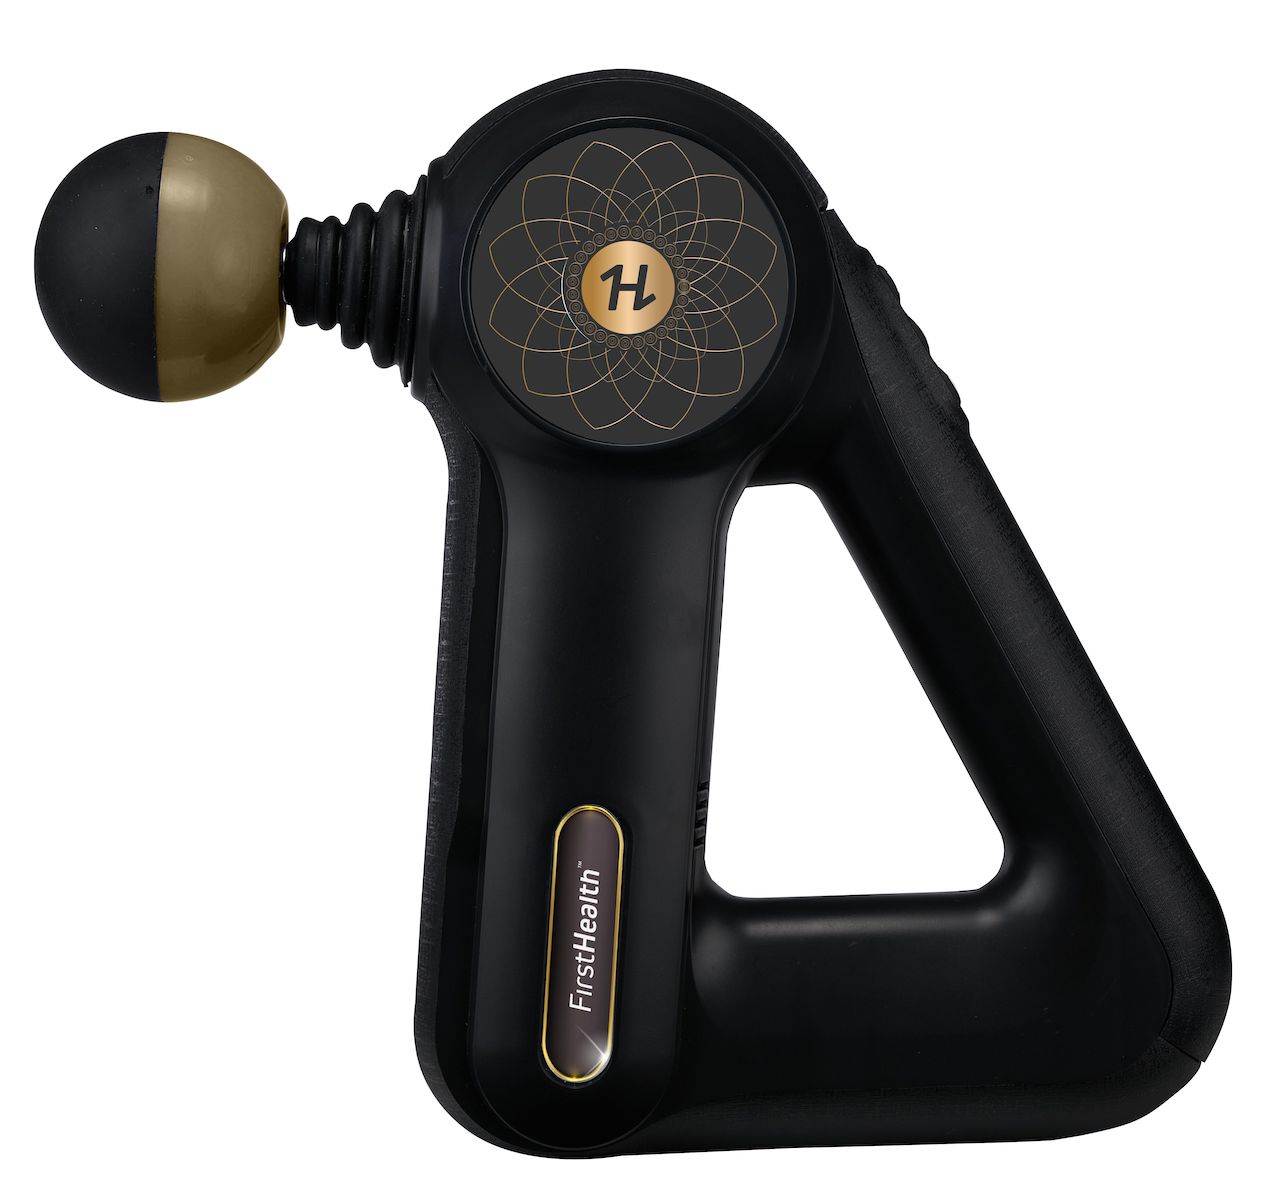 Trade pricey appointments for this percussion massager on sale for a limited time